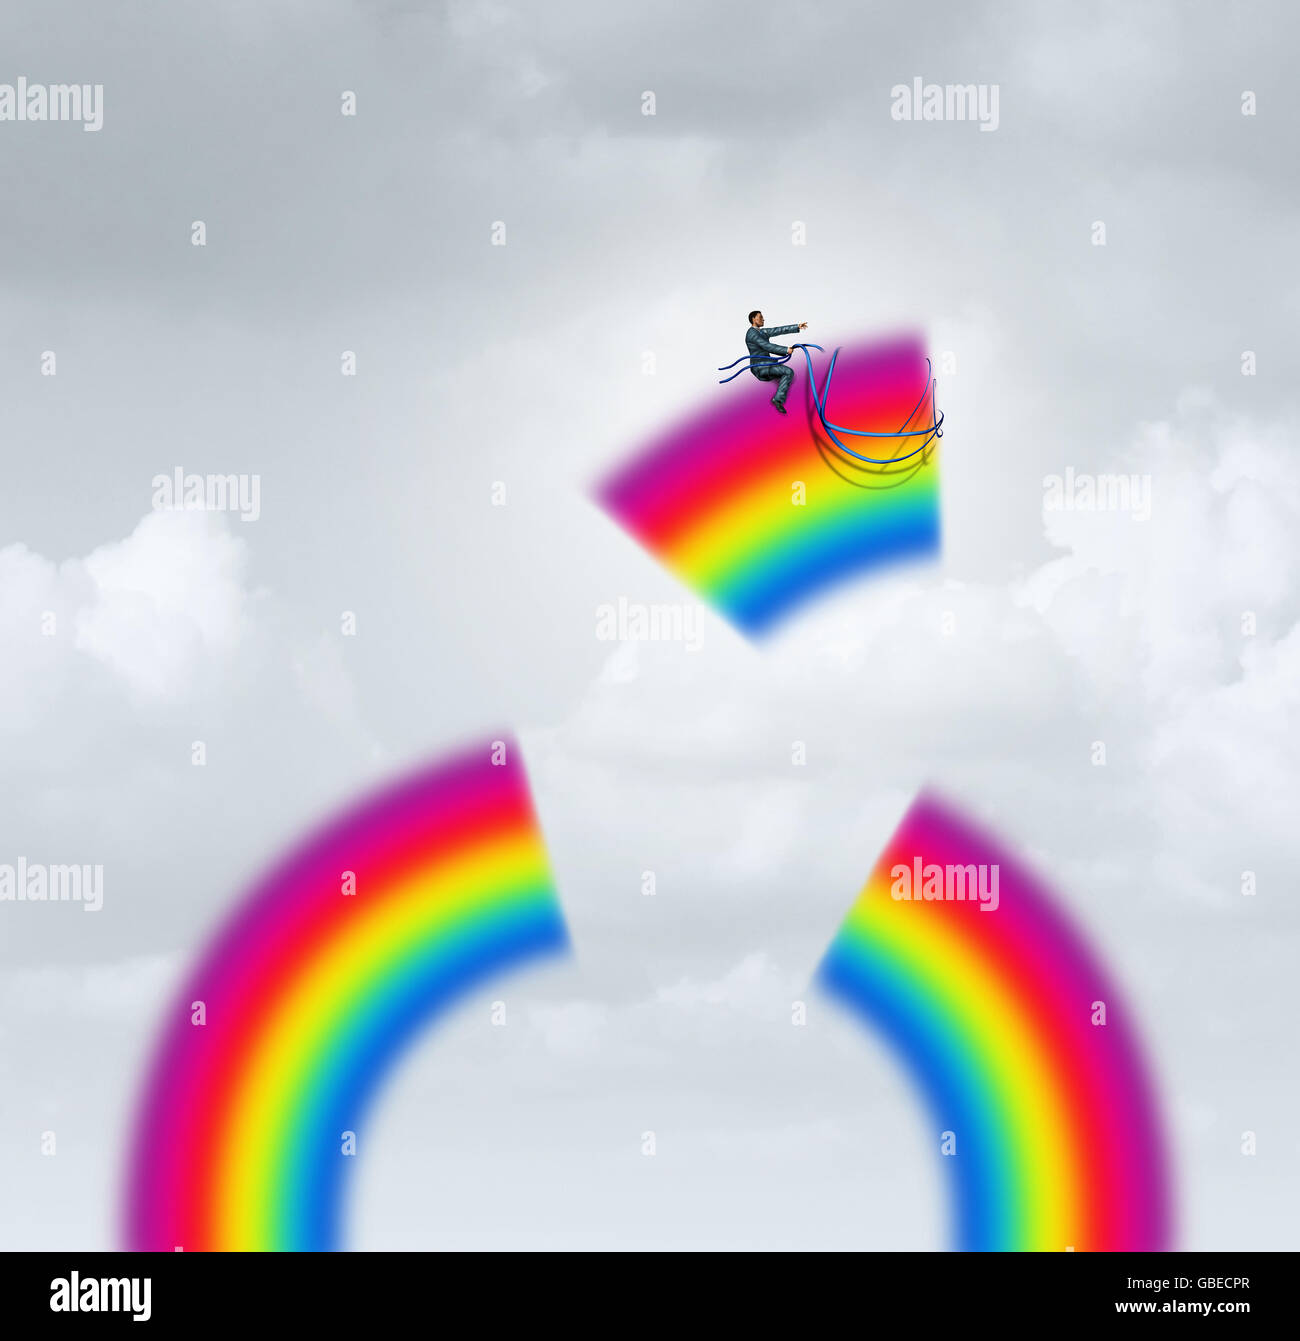 Create your own luck motivation concept as a businessman taking control of a piece of rainbow with a harness flying towards a career or life goal in a 3D illustration style. Stock Photo